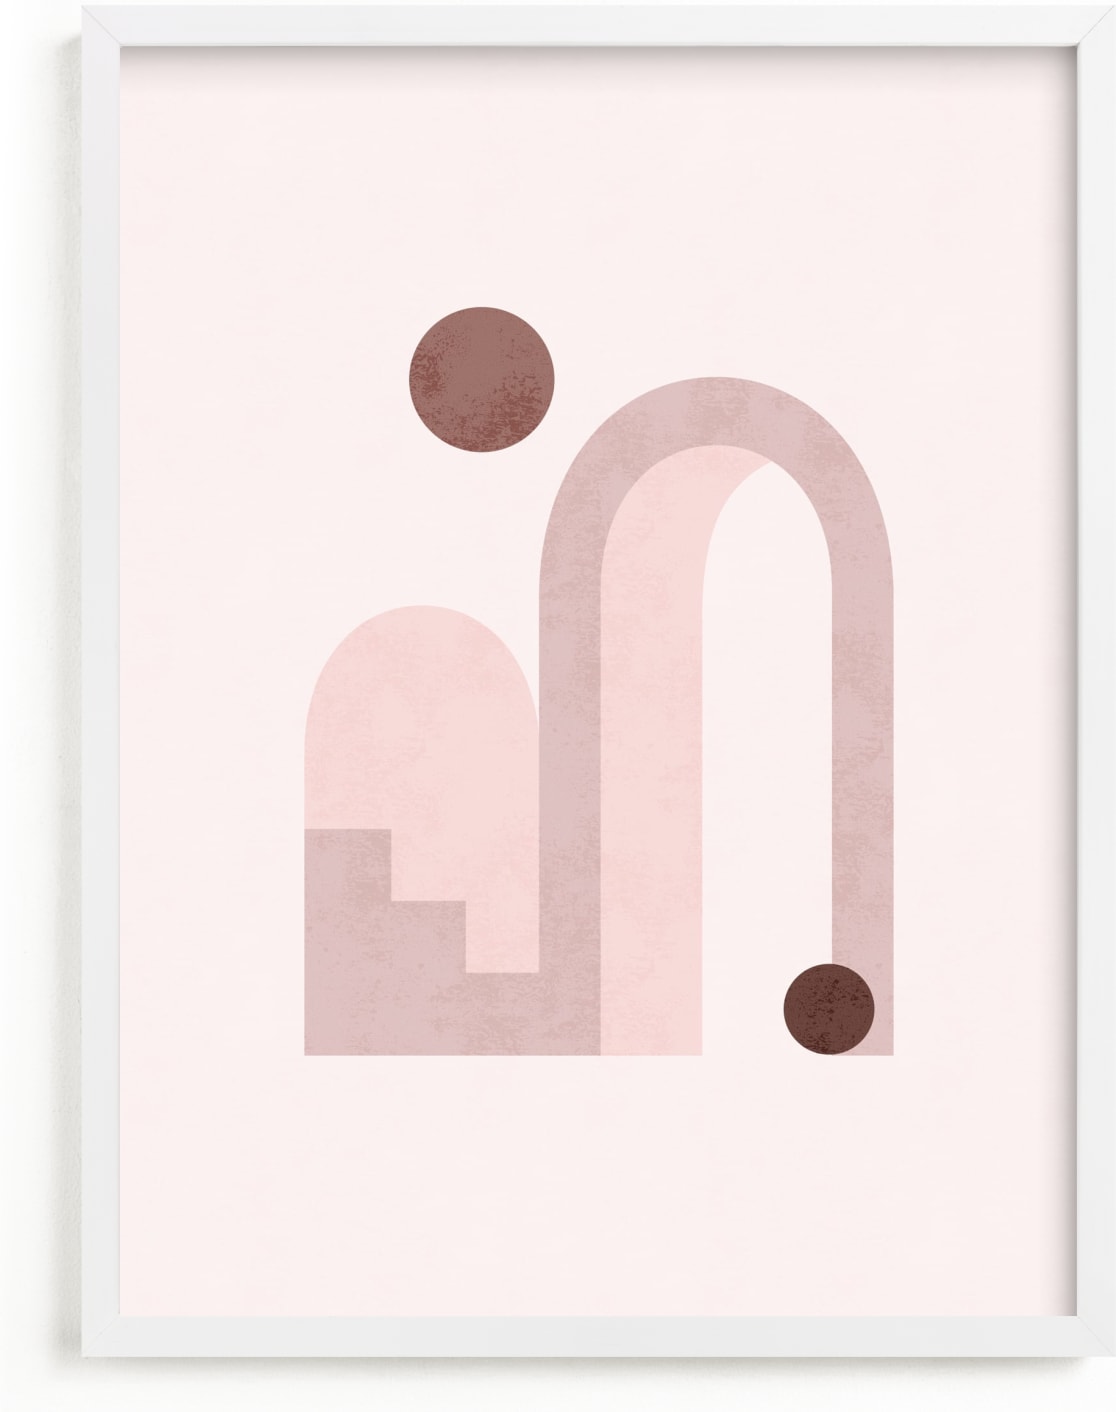 This is a pink art by Iveta Angelova called Rustic Geometry 3.